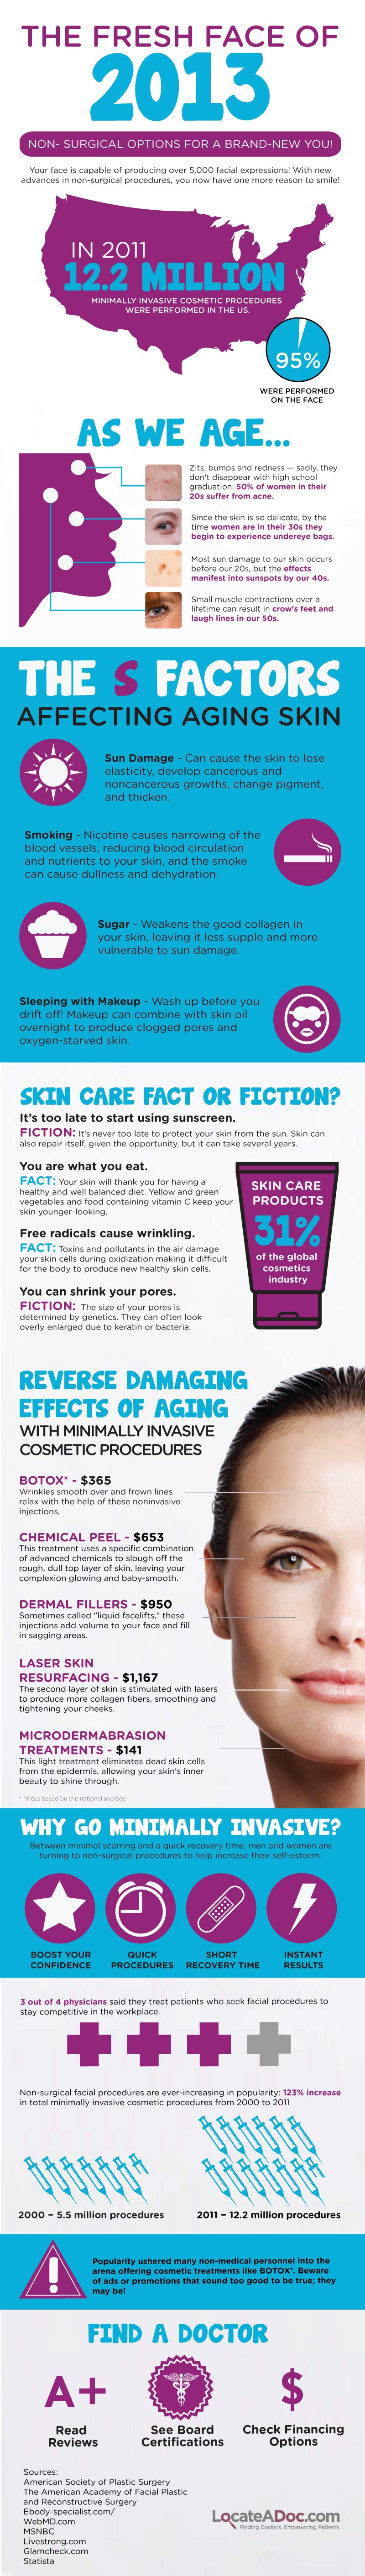 Skin Care and Facts